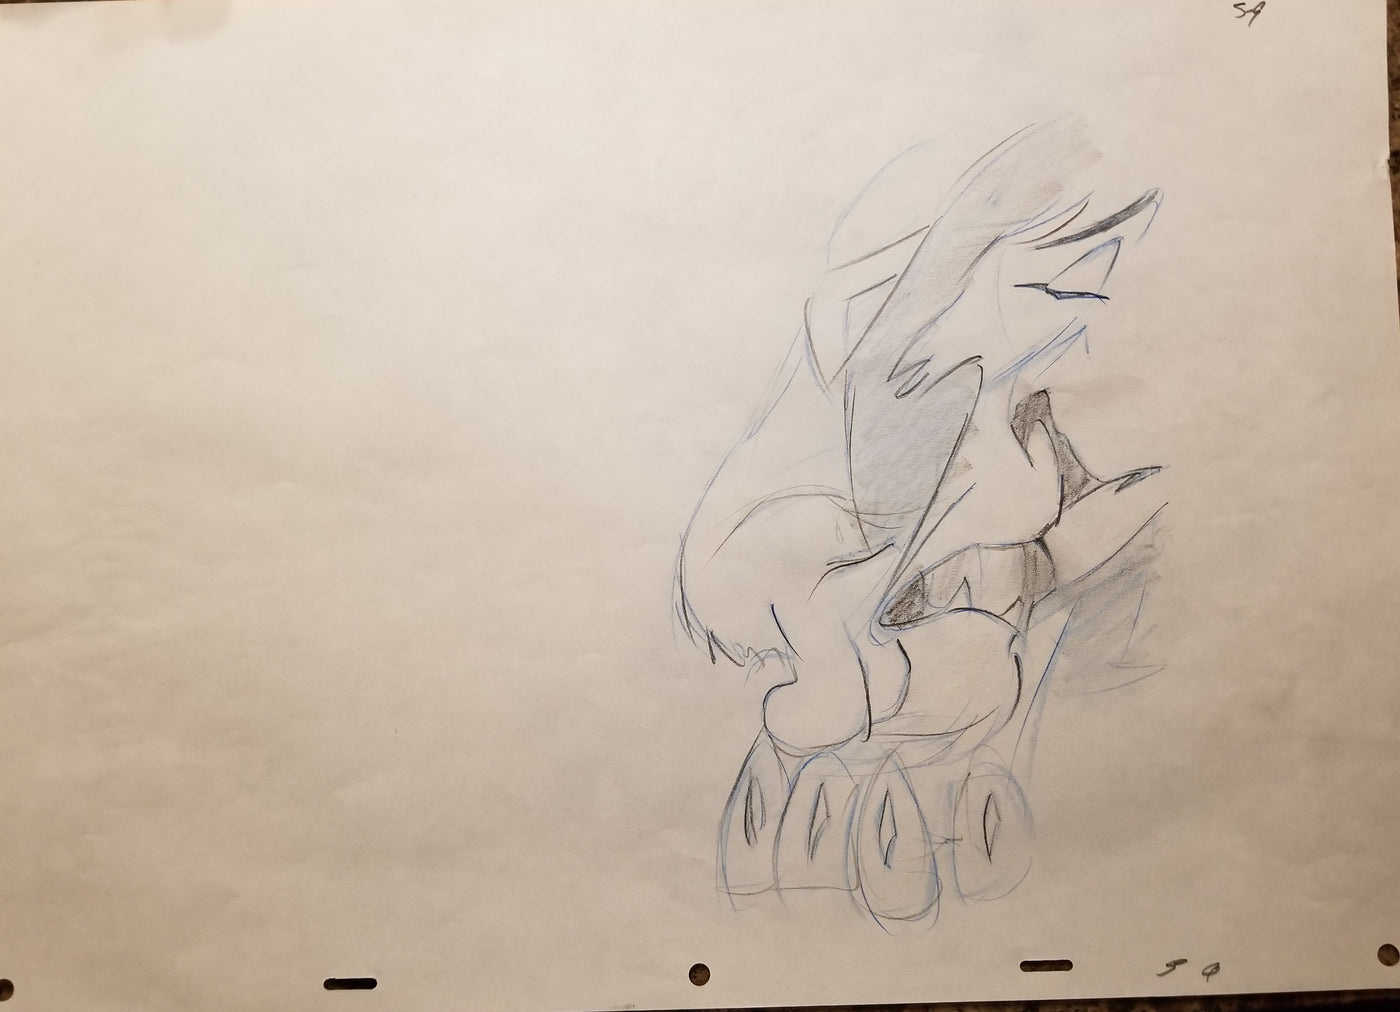 Original Walt Disney Production Drawing from The Lion King